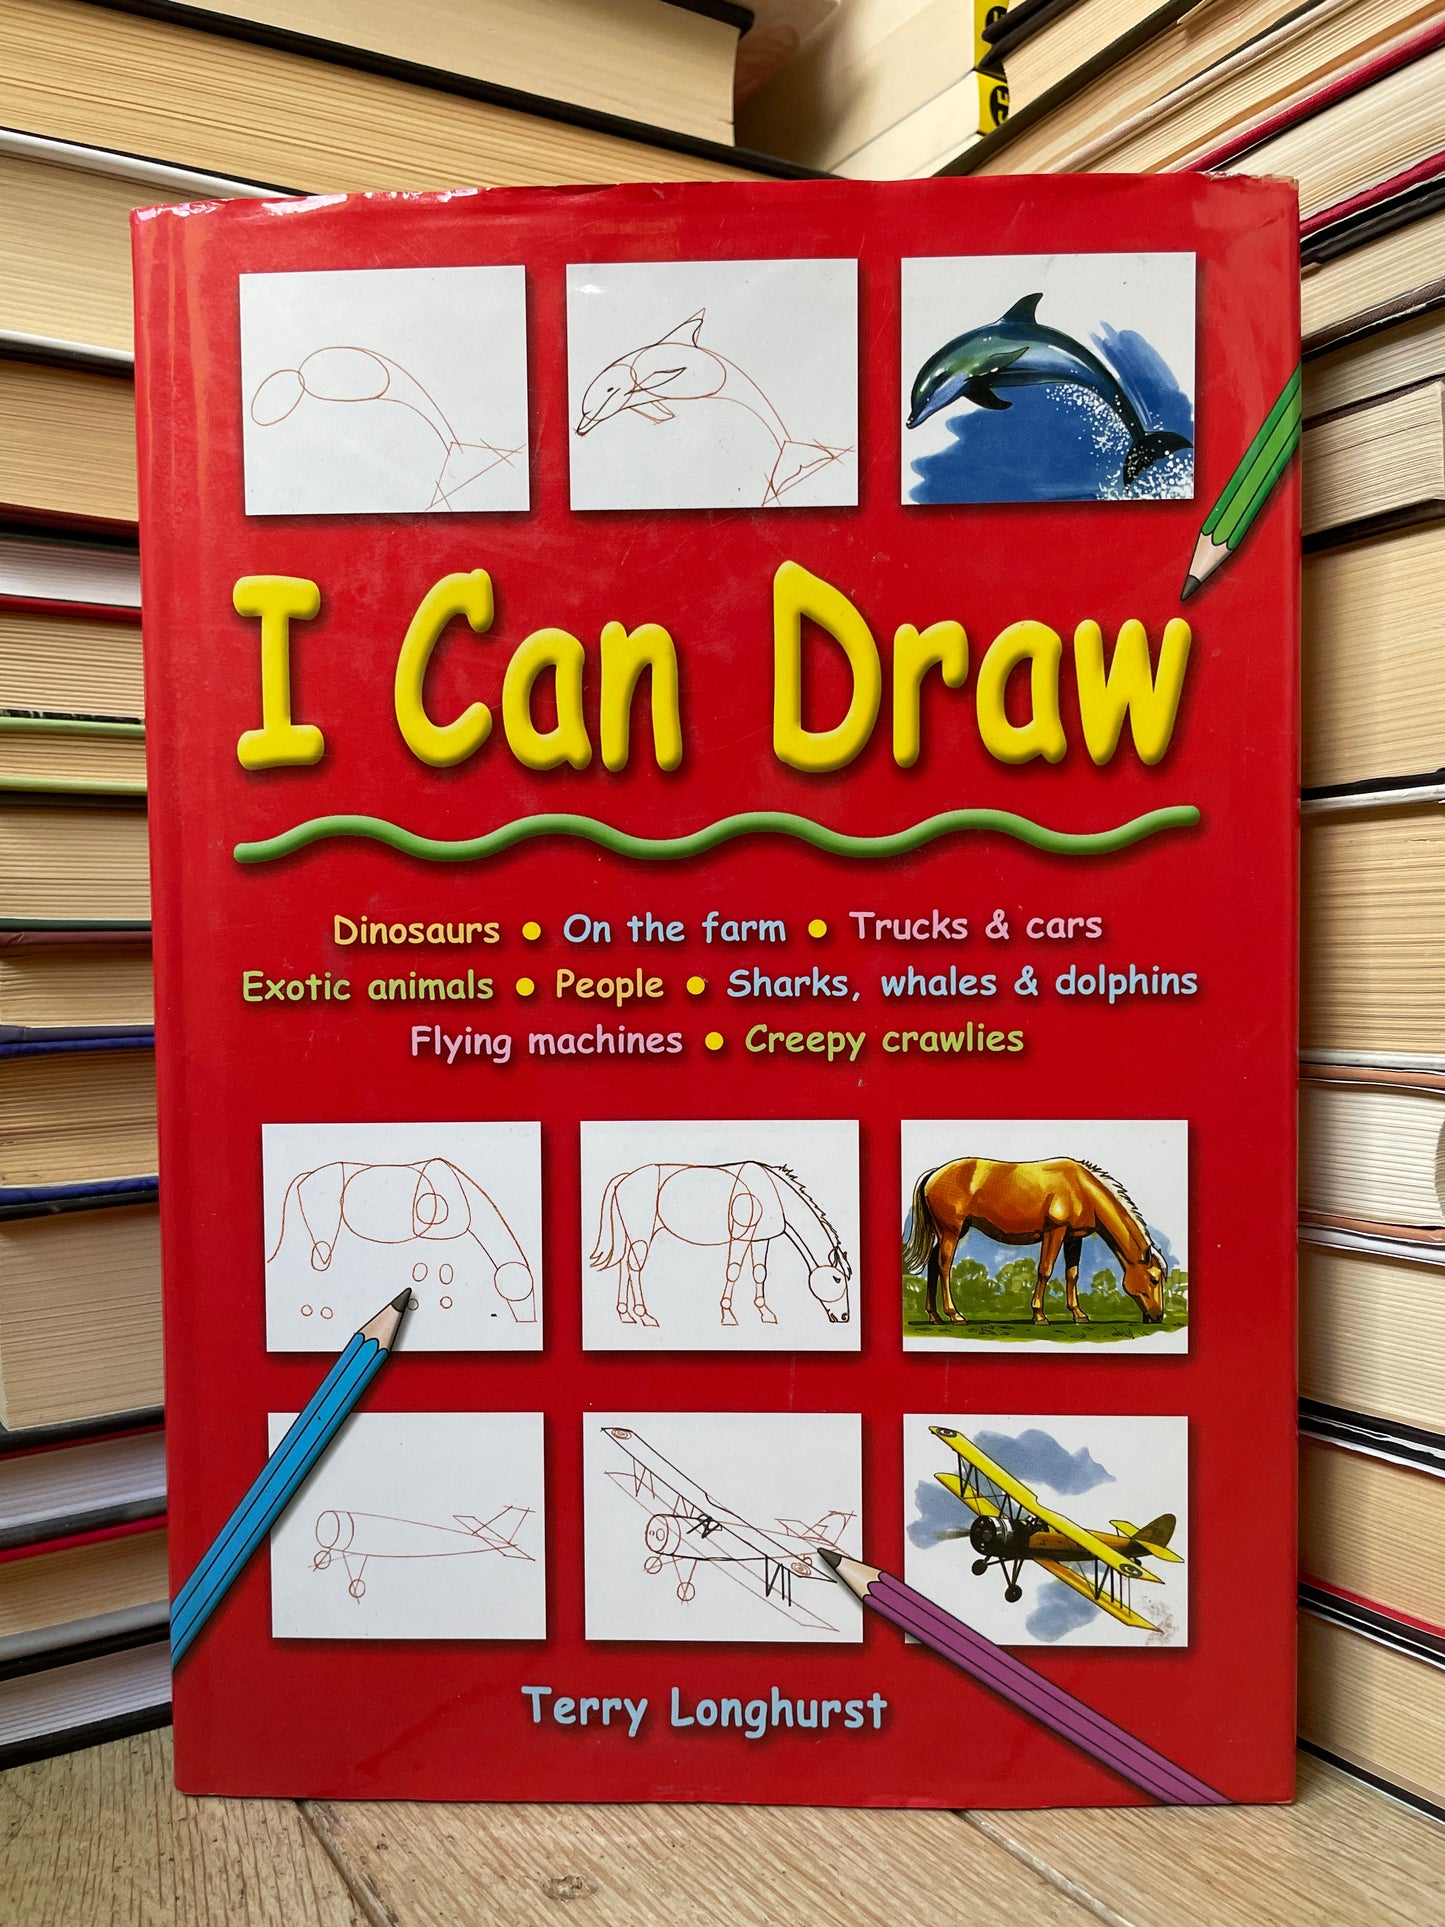 Terry Longhurst - I Can Draw